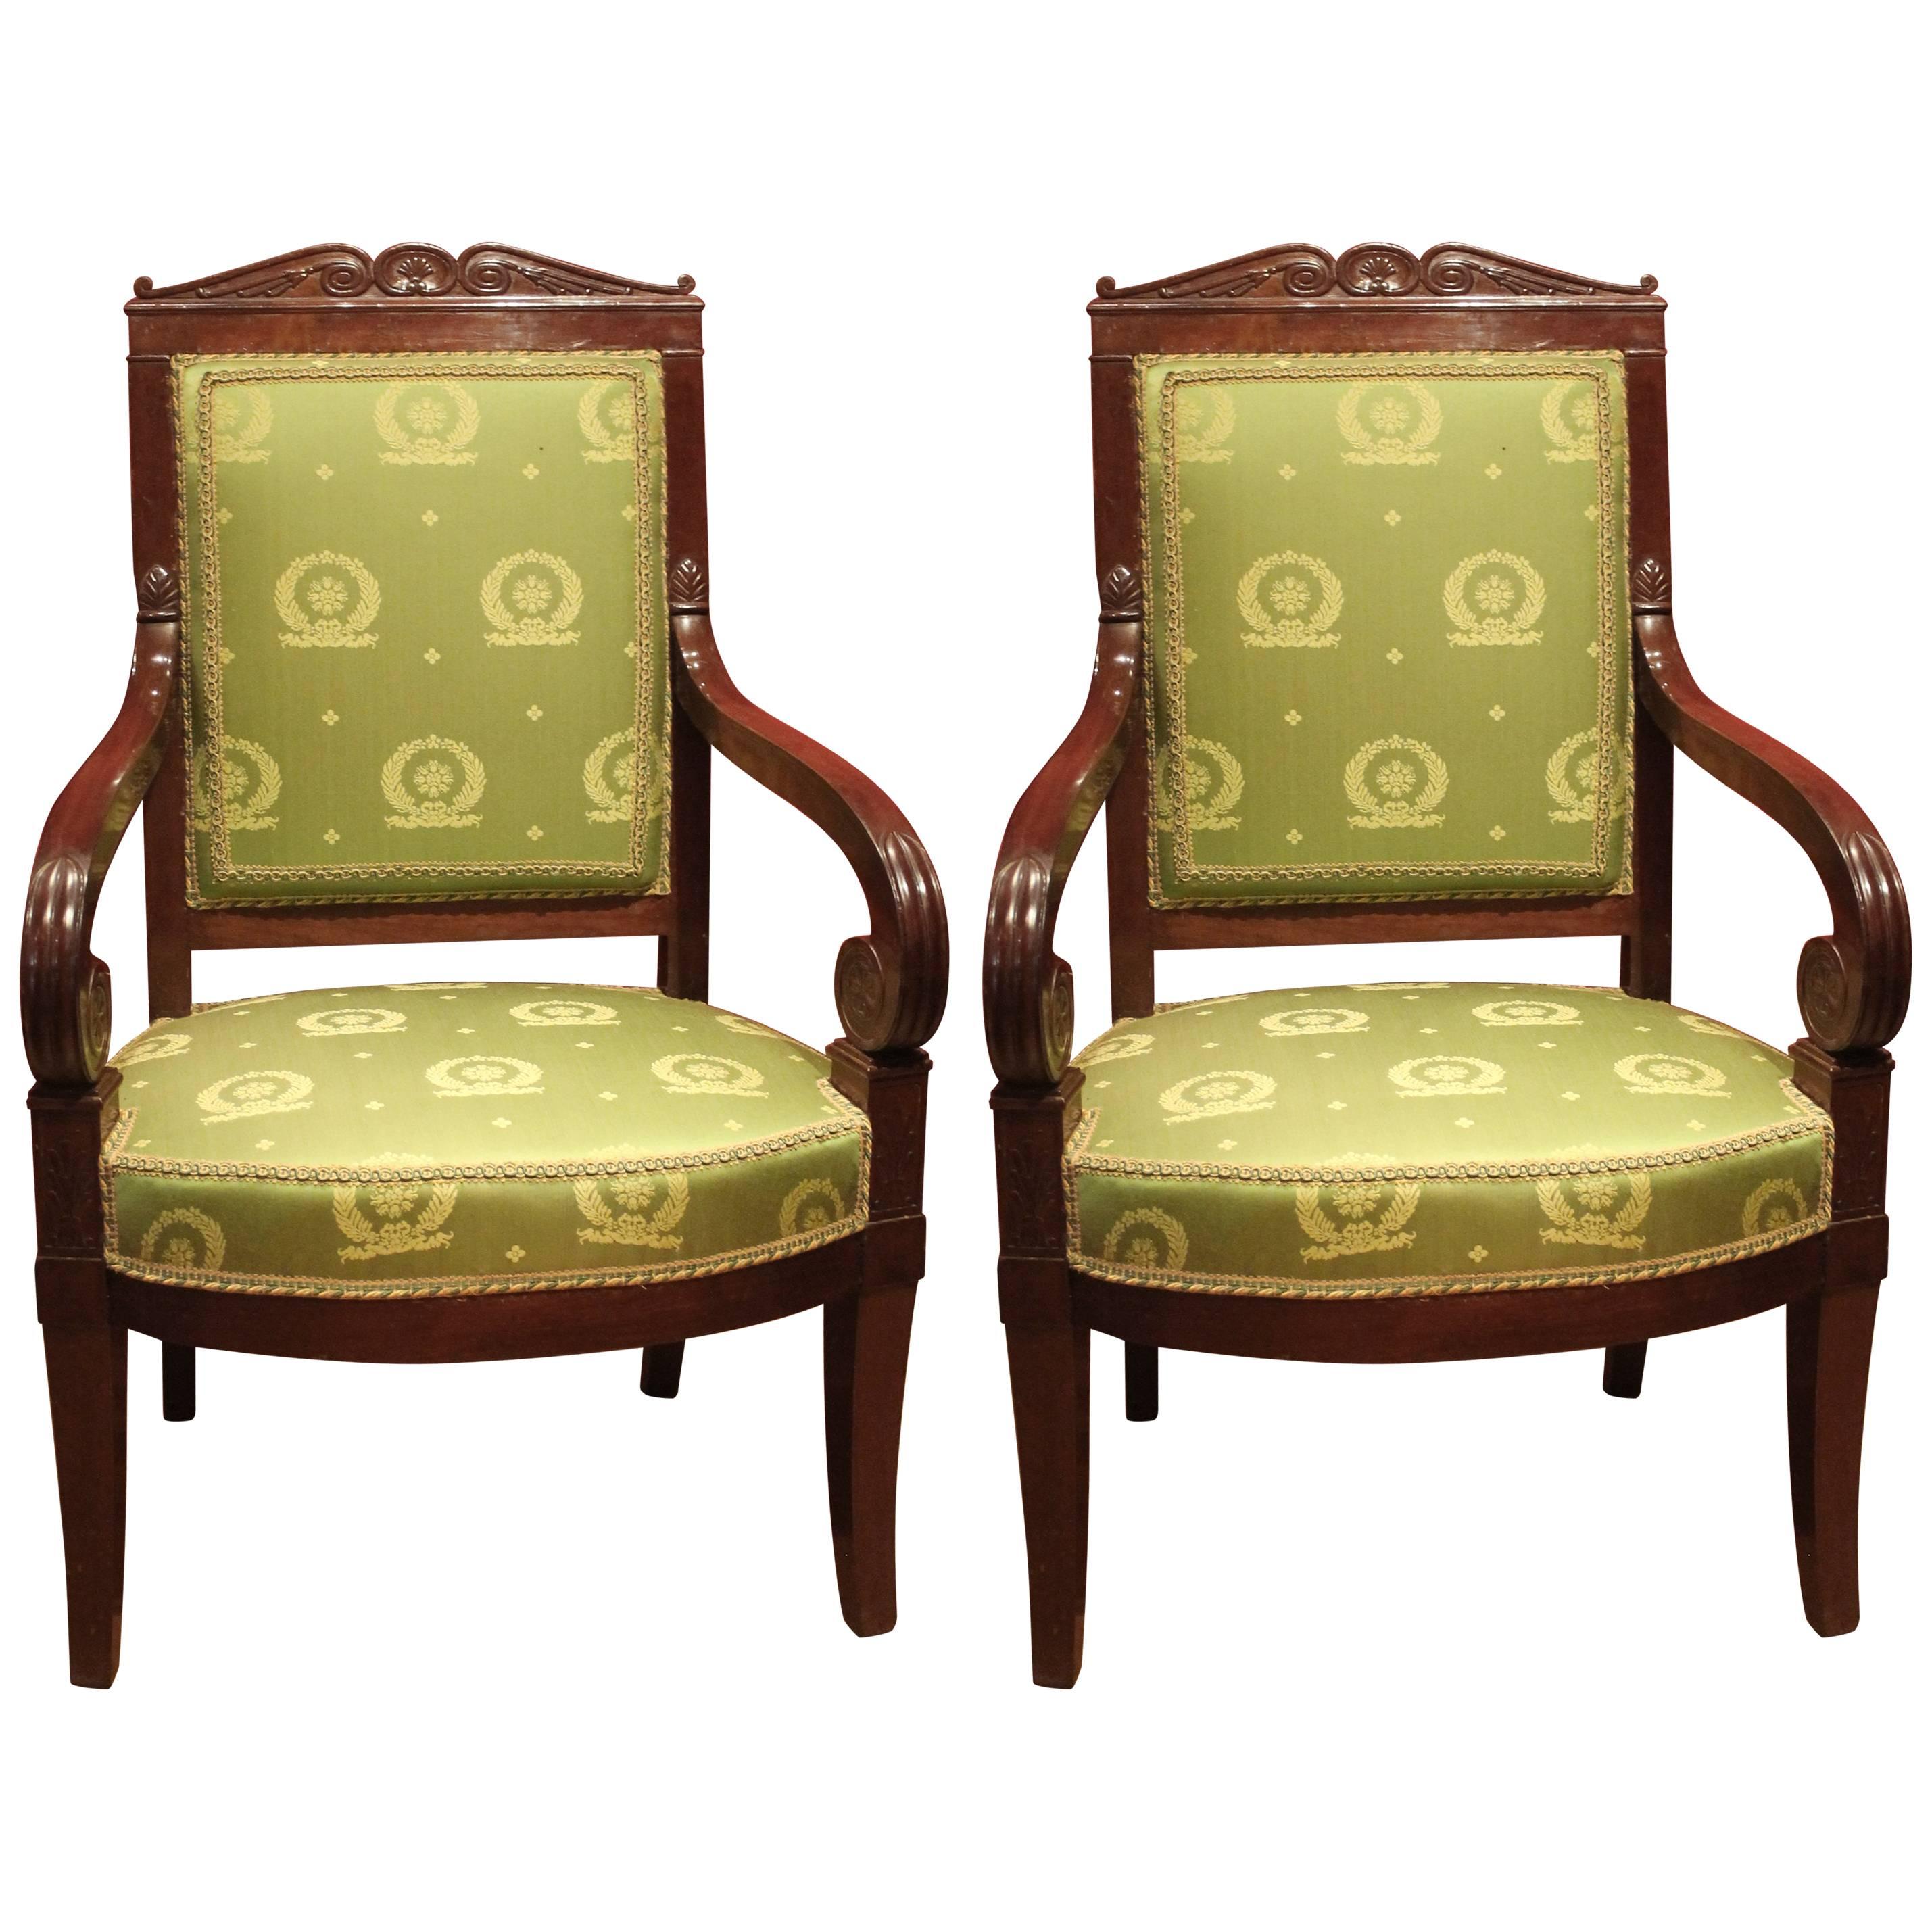 George Jacob 18th Century Pair of Mahogany and Green Silk Upholstered Armchairs 